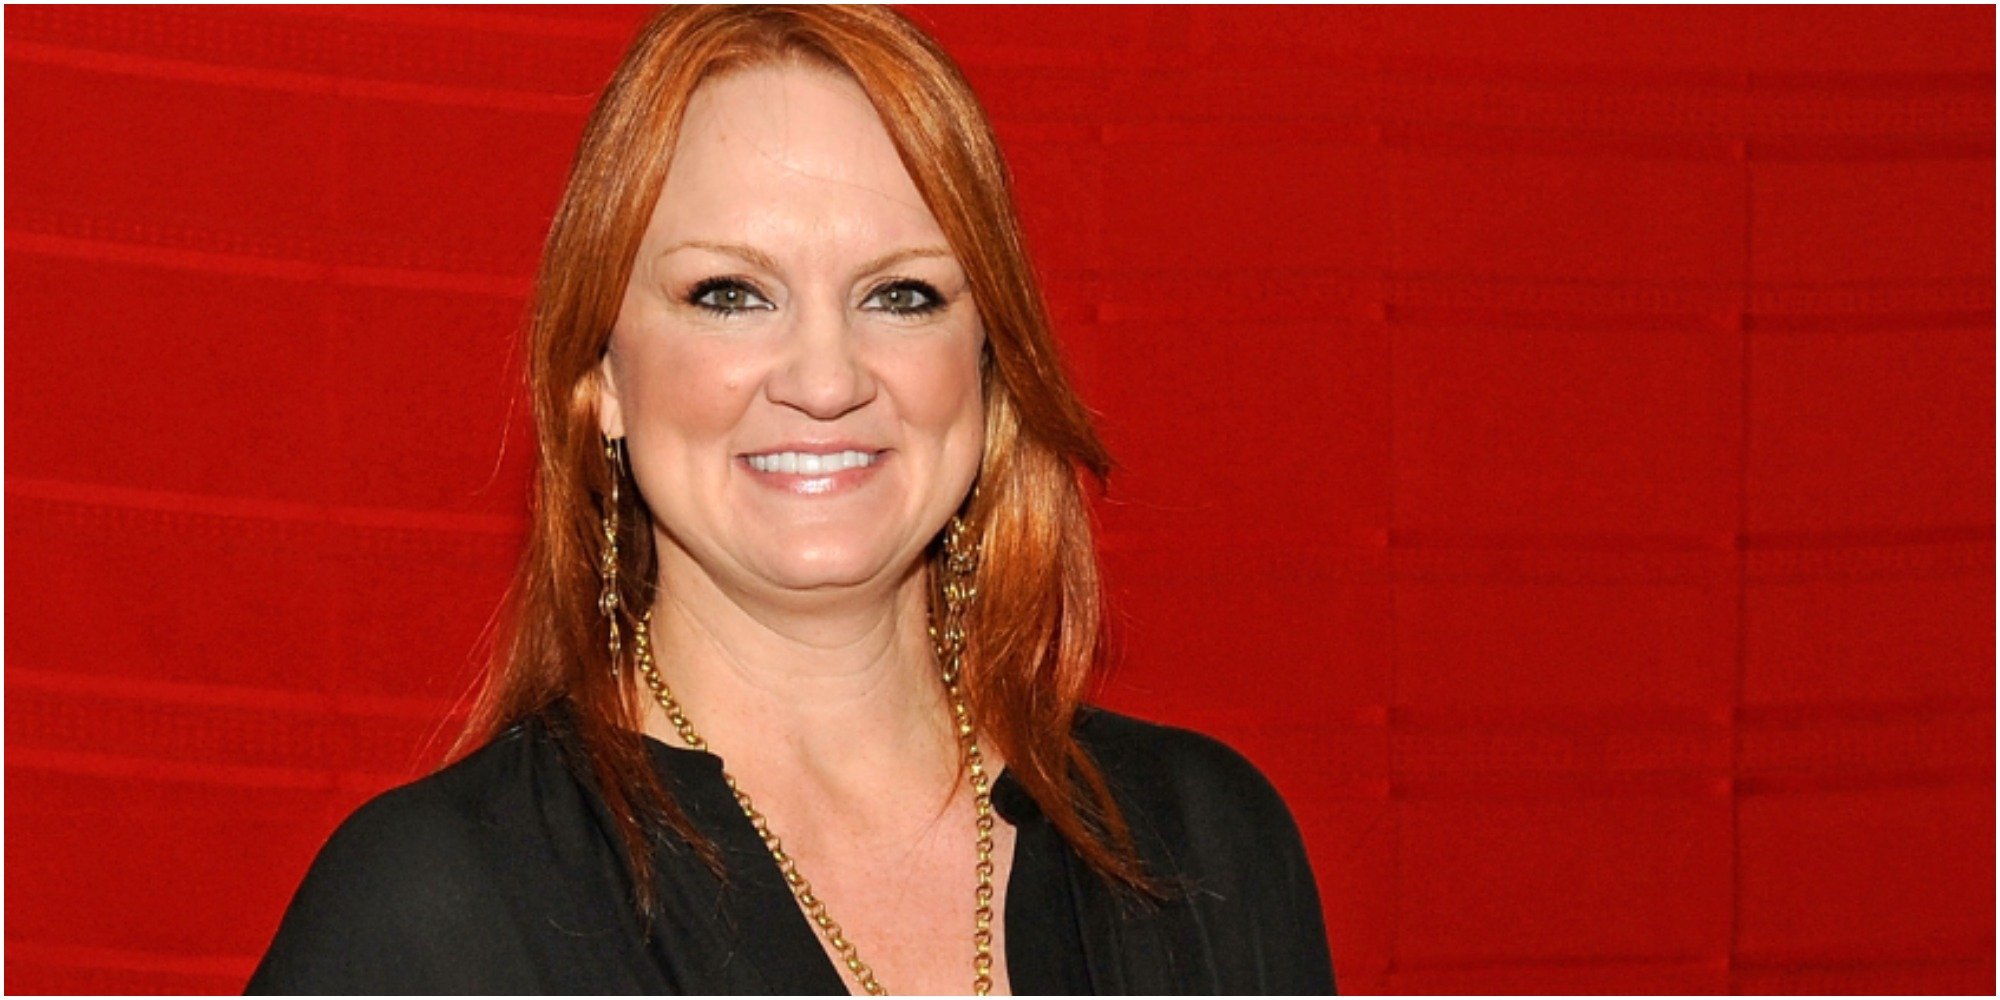 Ree Drummond poses in front of a red background for a press photo.